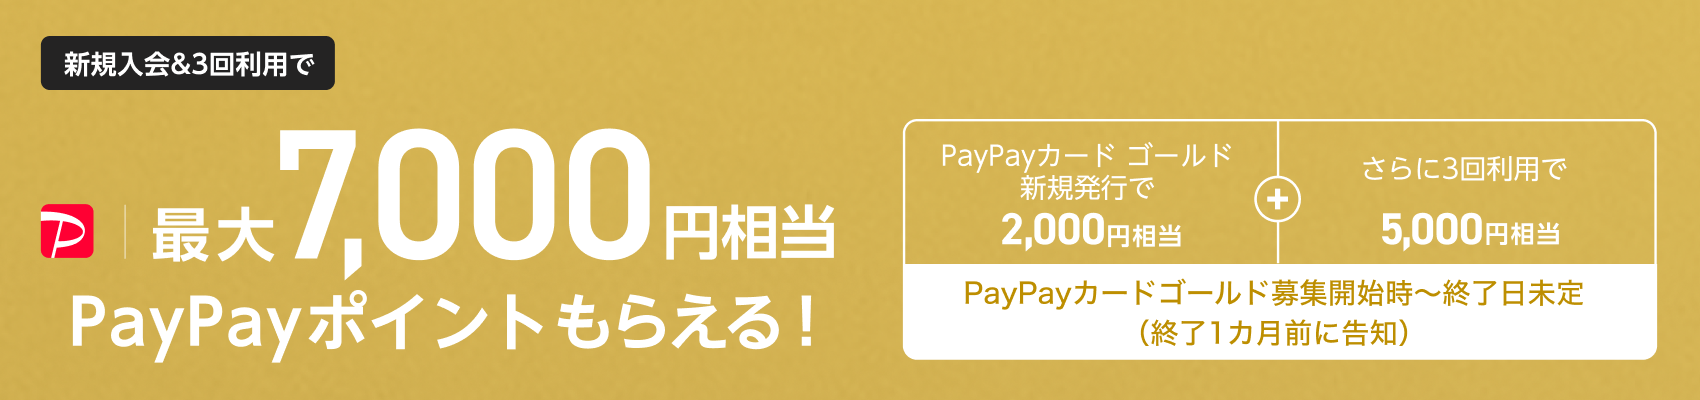 paypaycardgold_event.png